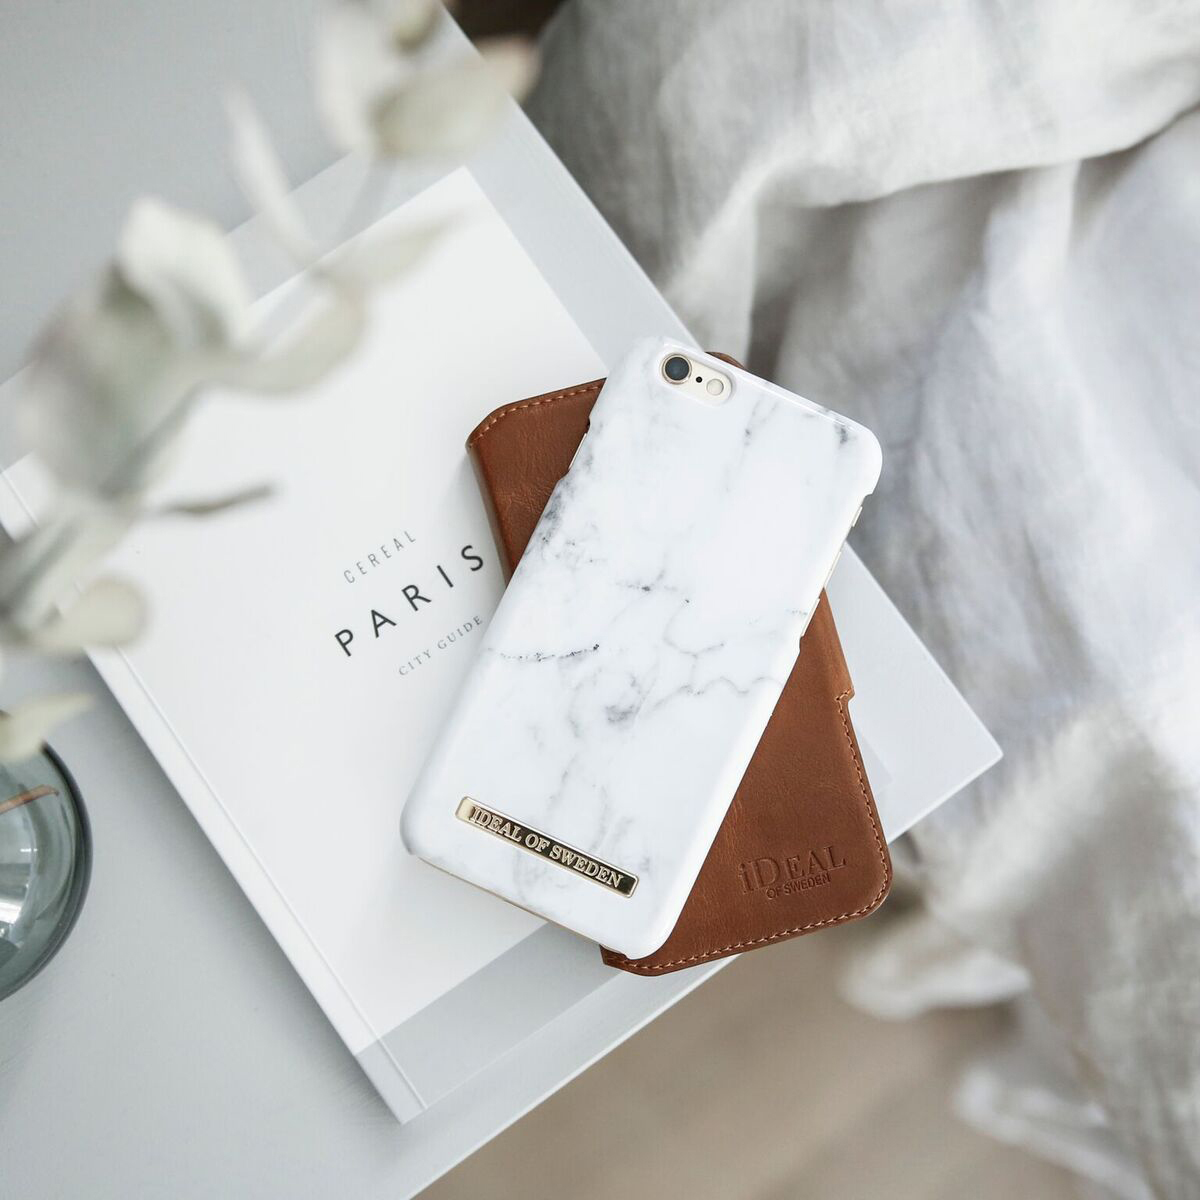 7, iPhone IDEAL SWEDEN Marble White Apple, 8, Backcover, iPhone Fashion, iPhone 6, OF